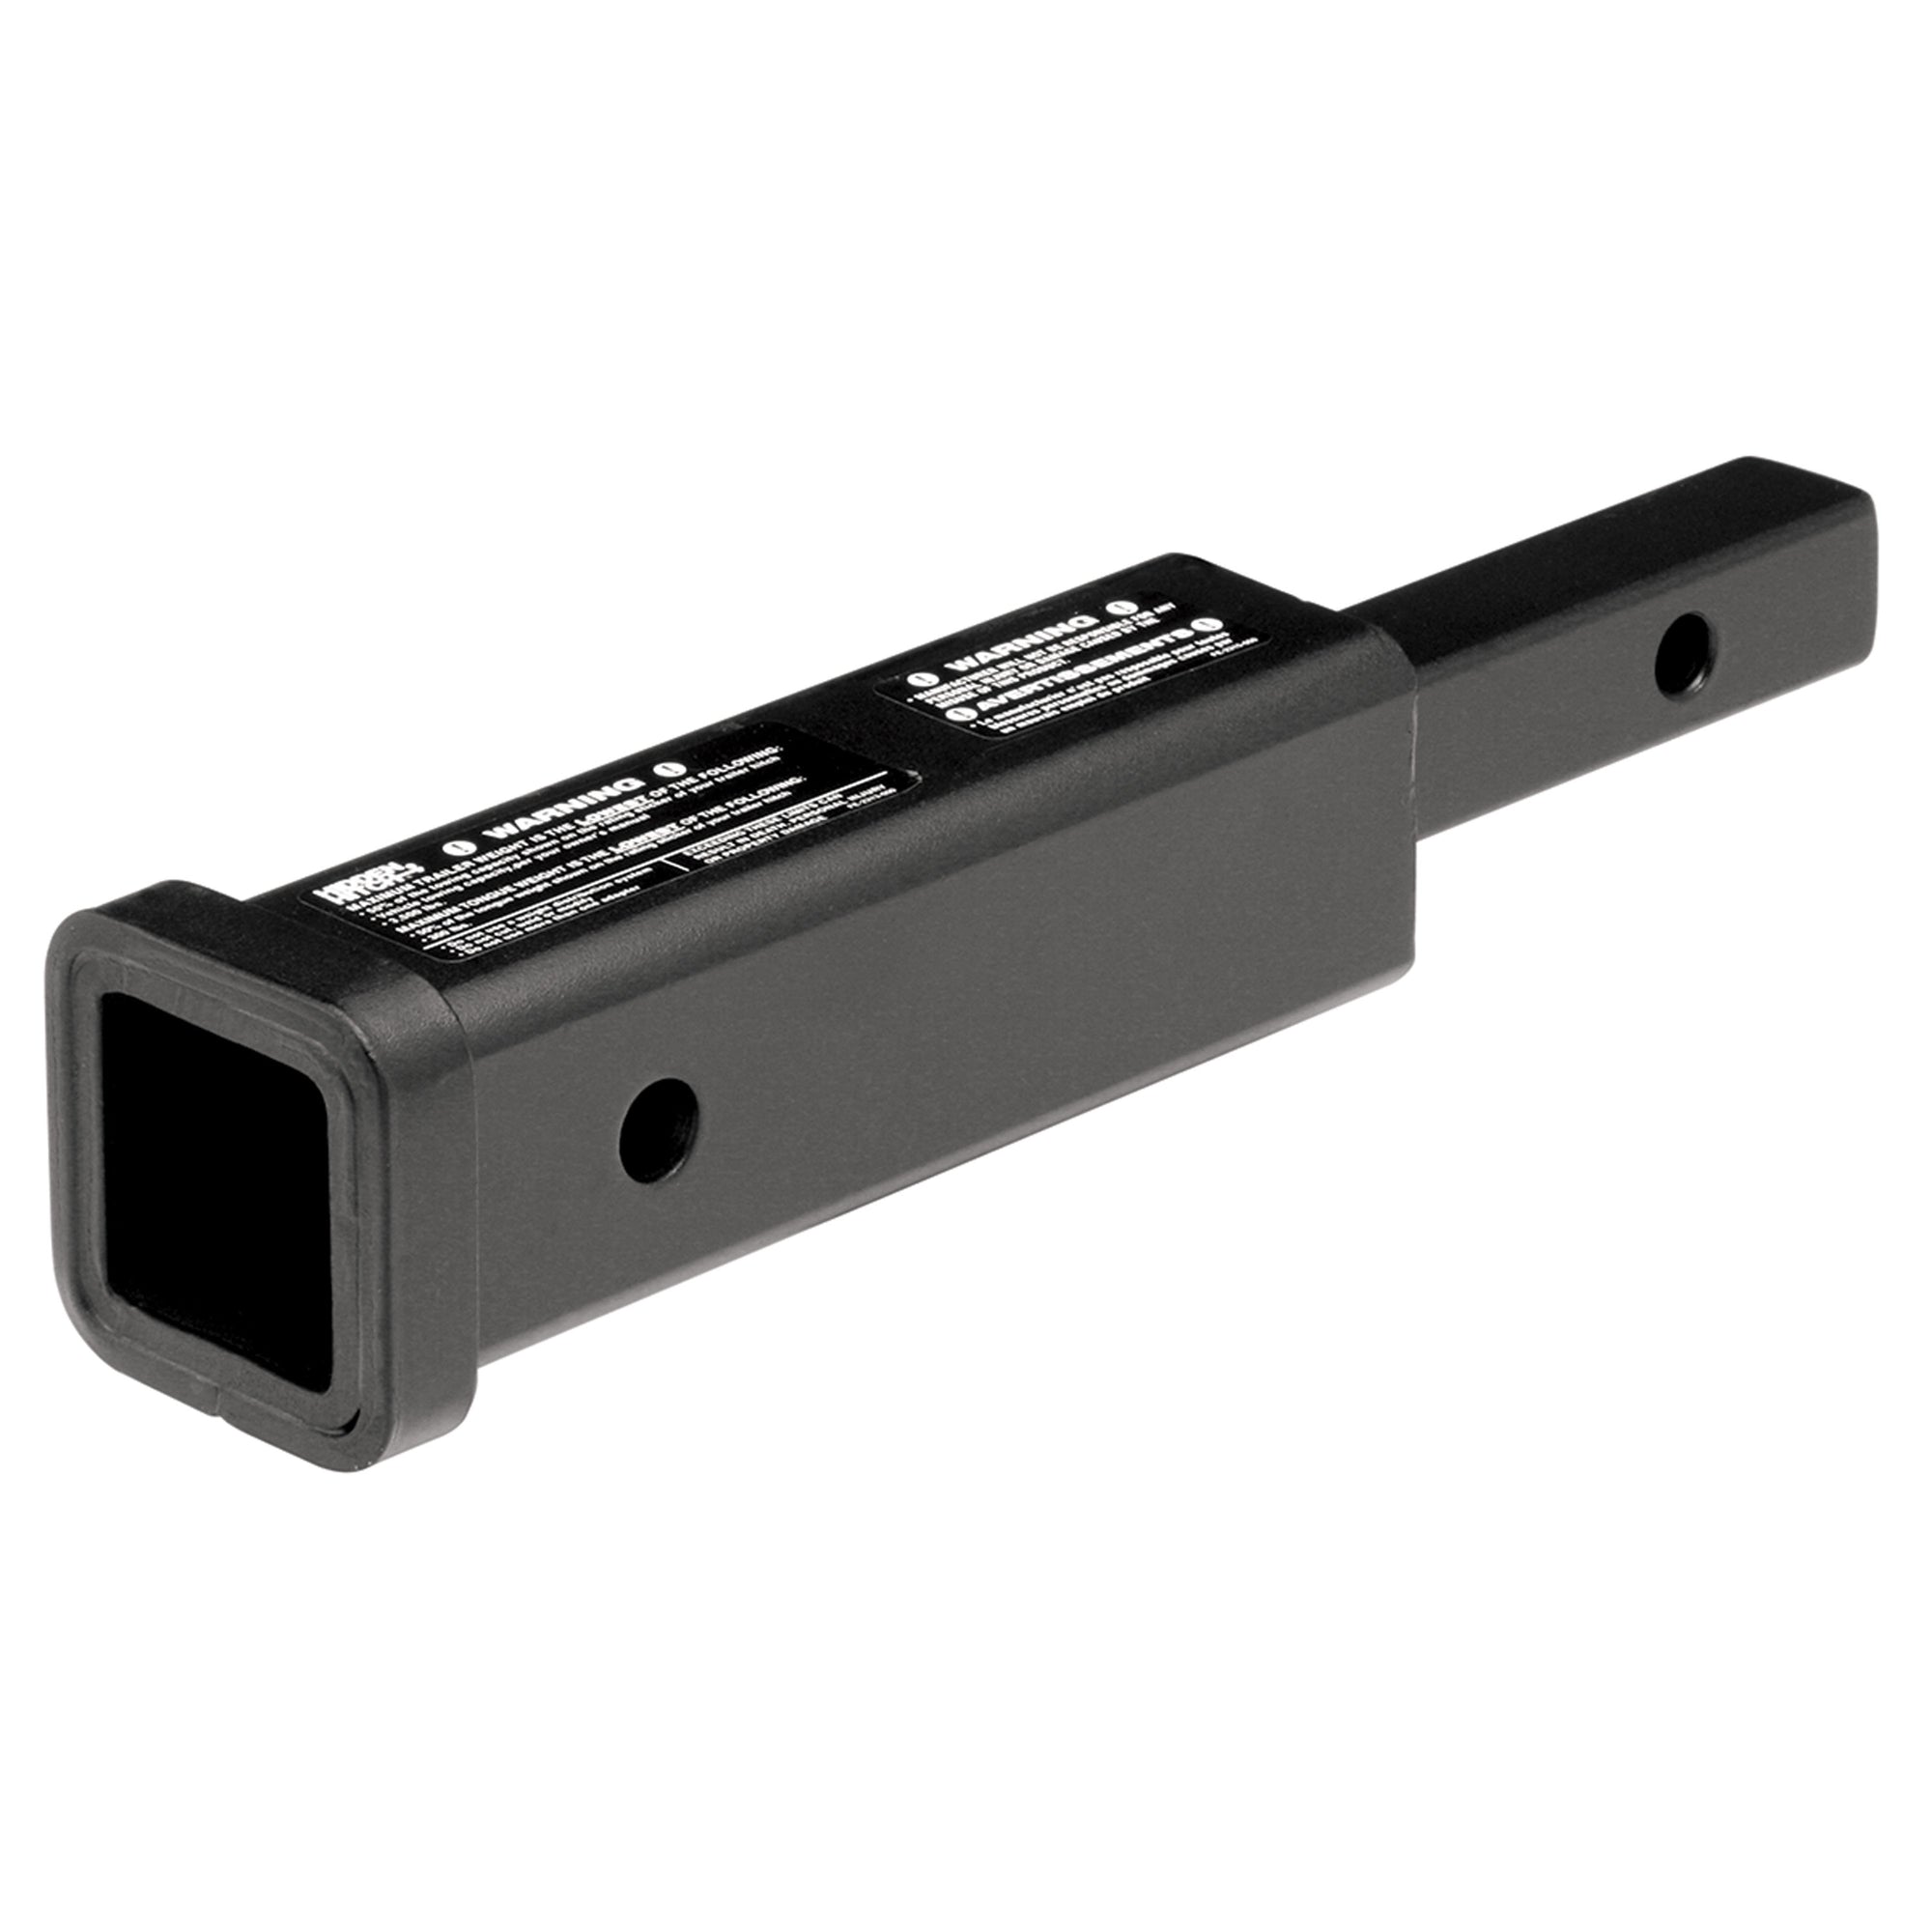 Reese 80304 Receiver Adapter - 1-1/4" to 2", 10" Length, 3500 lbs.